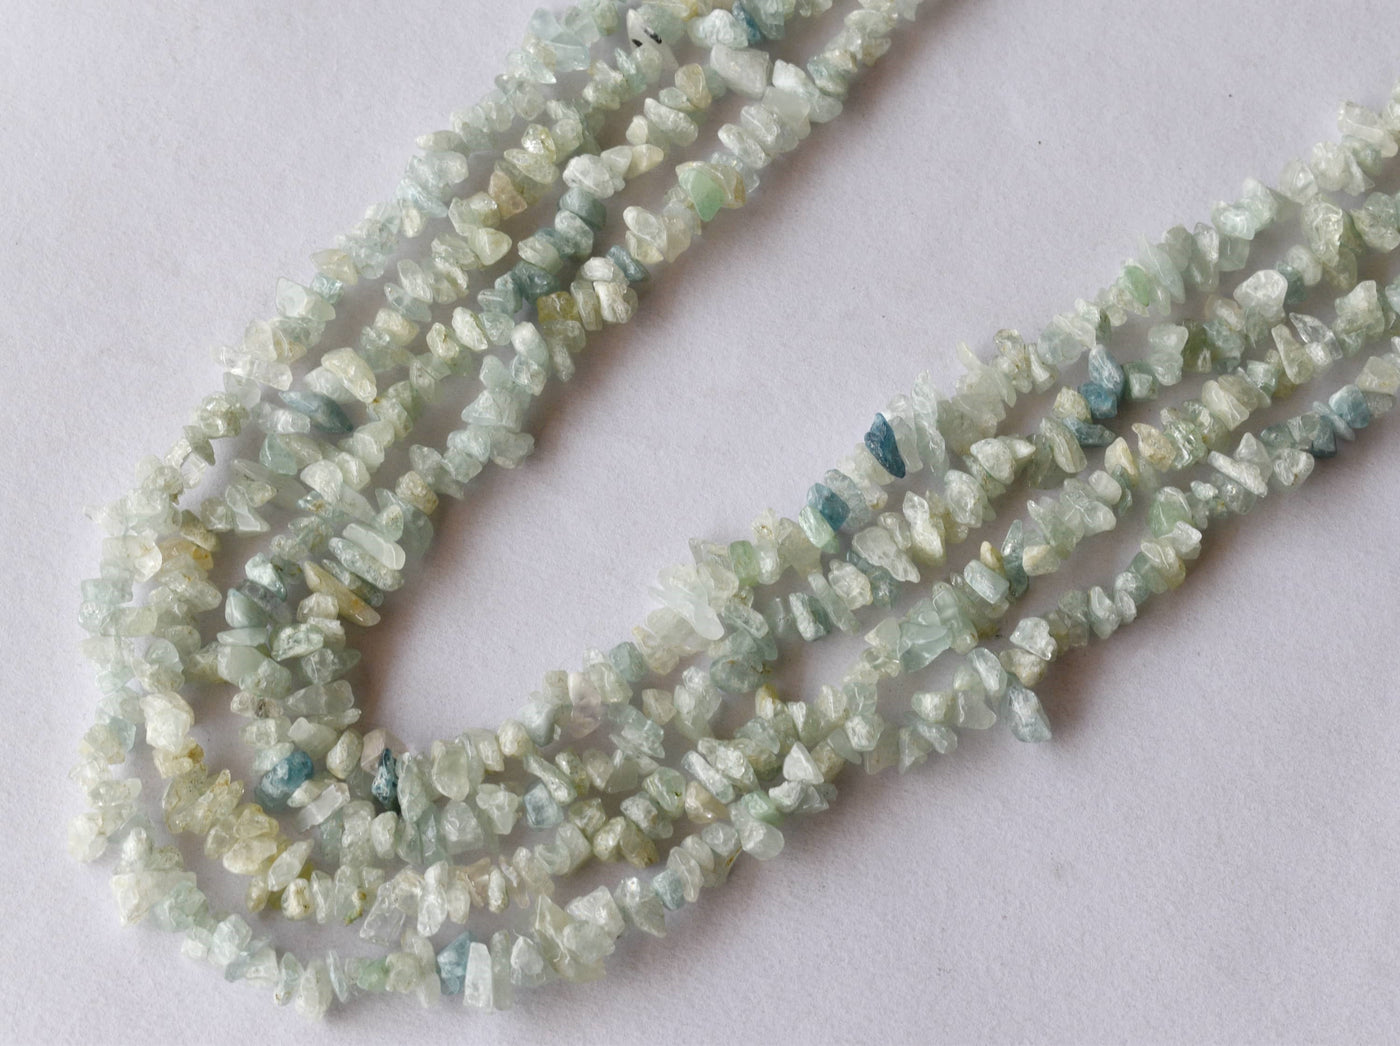 Uncut Raw Amazonite Crystal Chip Beads for Necklace (Alignment Of Chakra and Trust)